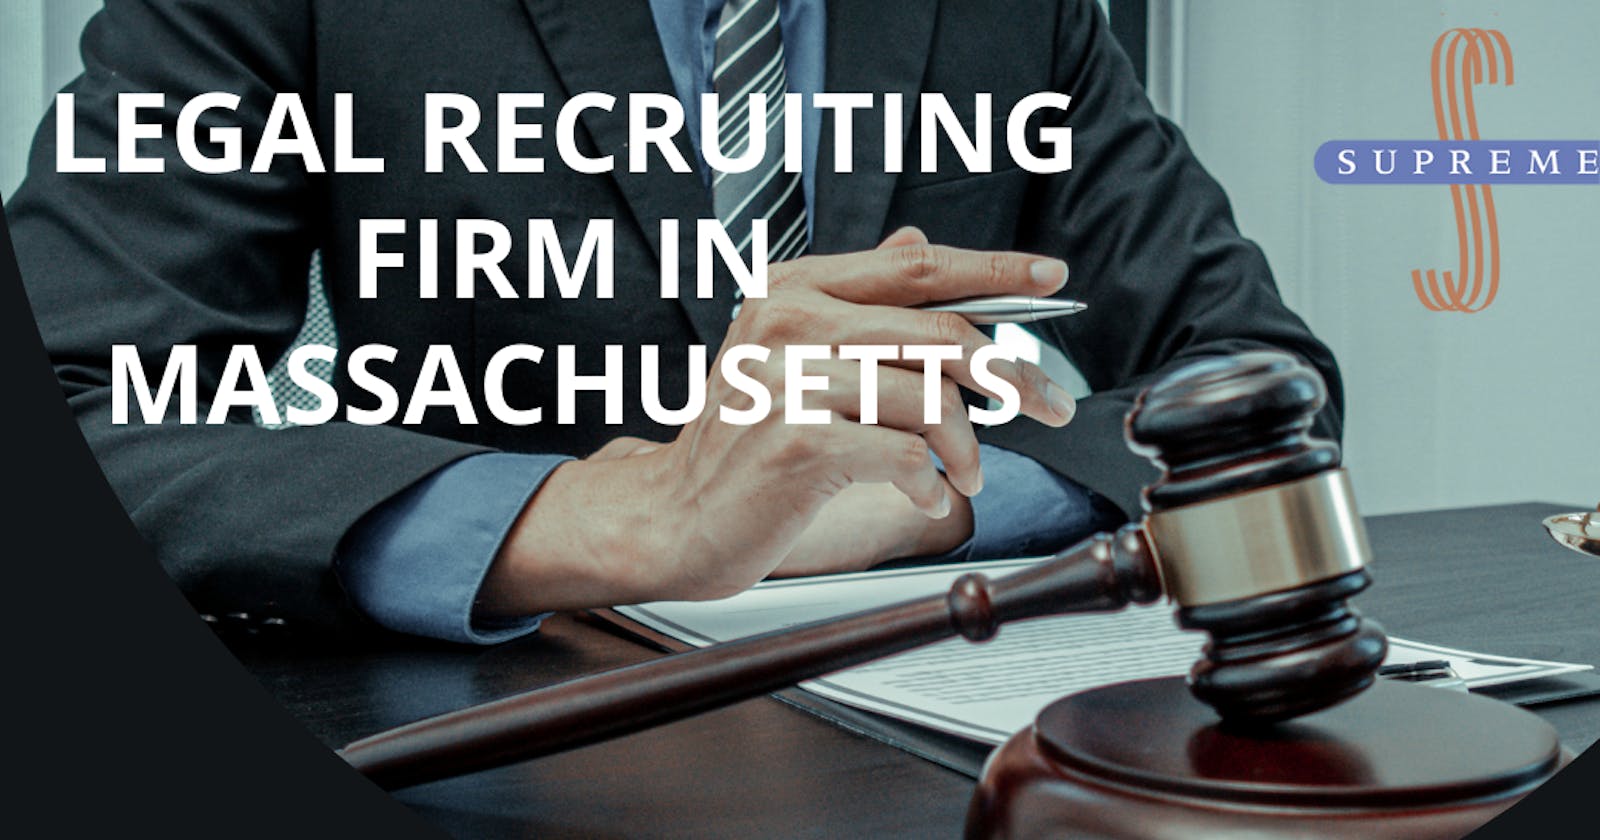 Overcoming the Challenges: Finding Legal Jobs with a Trusted Legal Recruiting Firm